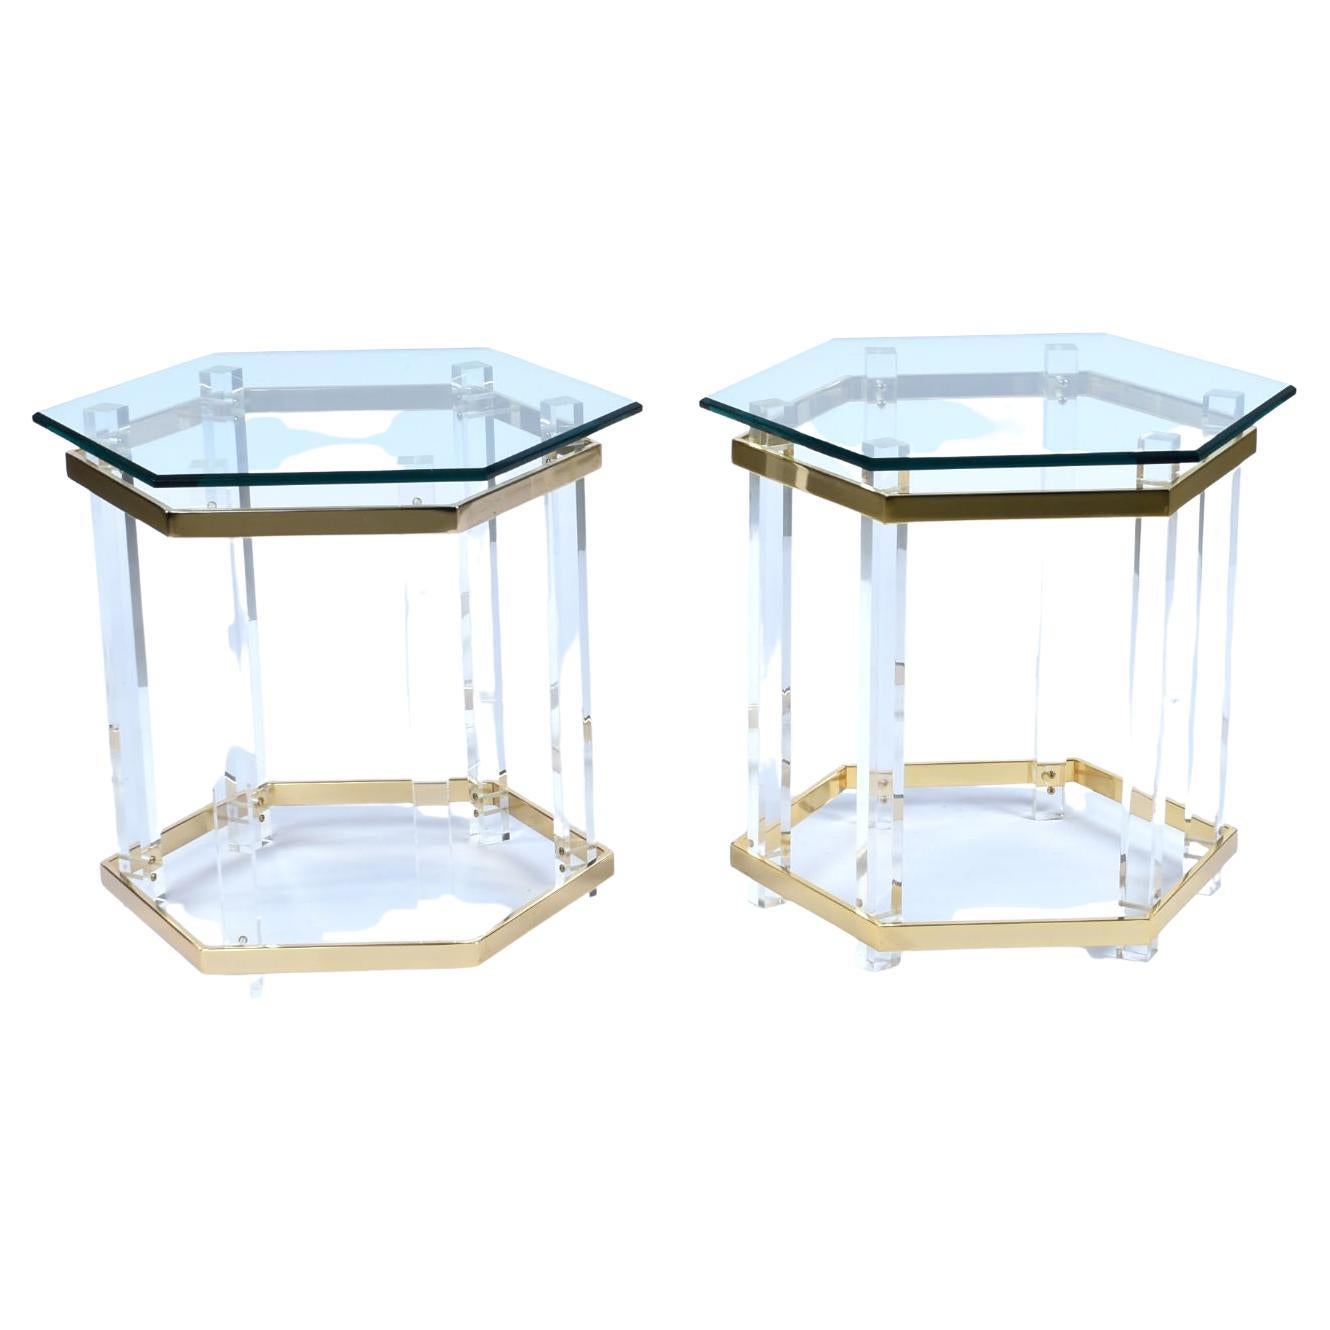 Vintage 1970s Hollywood Regency Acrylic Lucite Glass and Brass End Tables